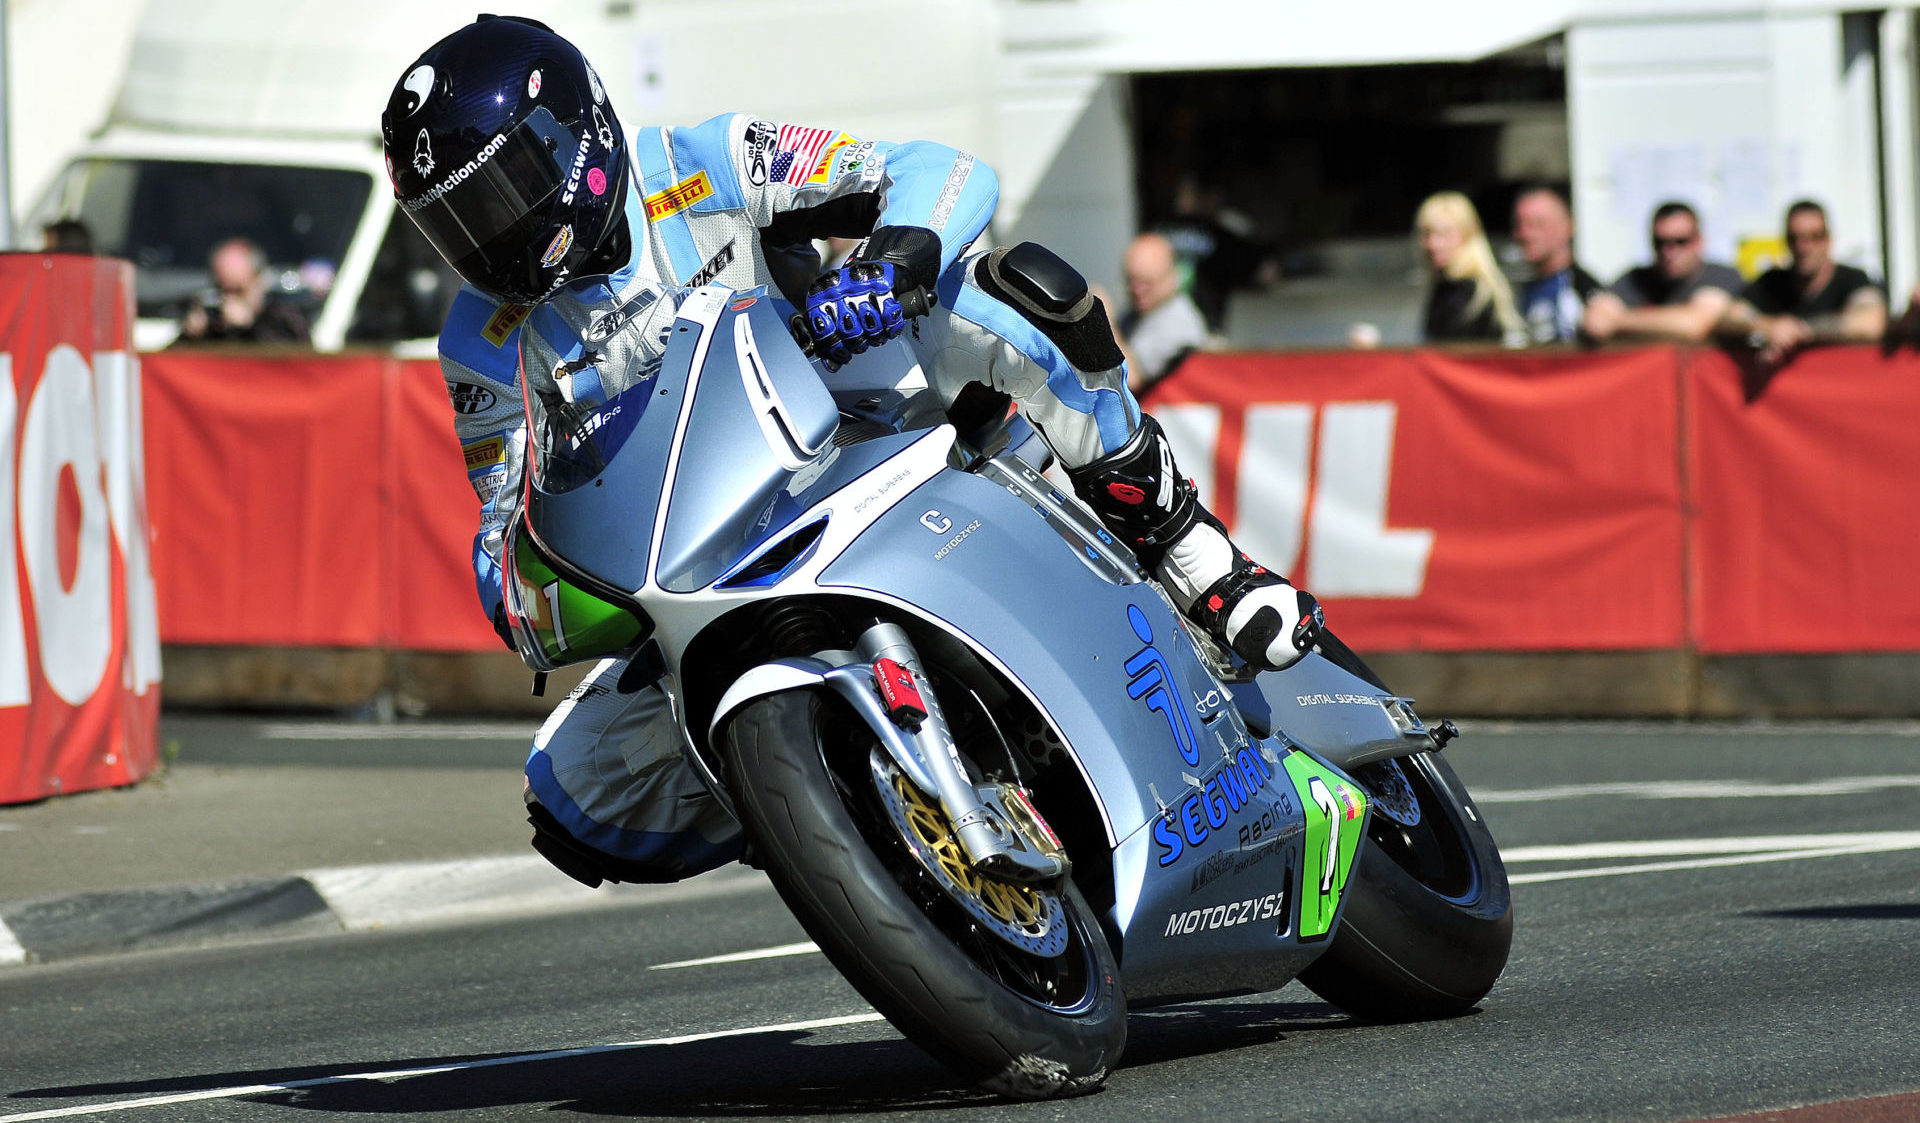 Mark Miller (1) on the MotoCzysz electric racebike at the Isle of Man TT in 2011. Photo courtesy of IOM TT Press Office.